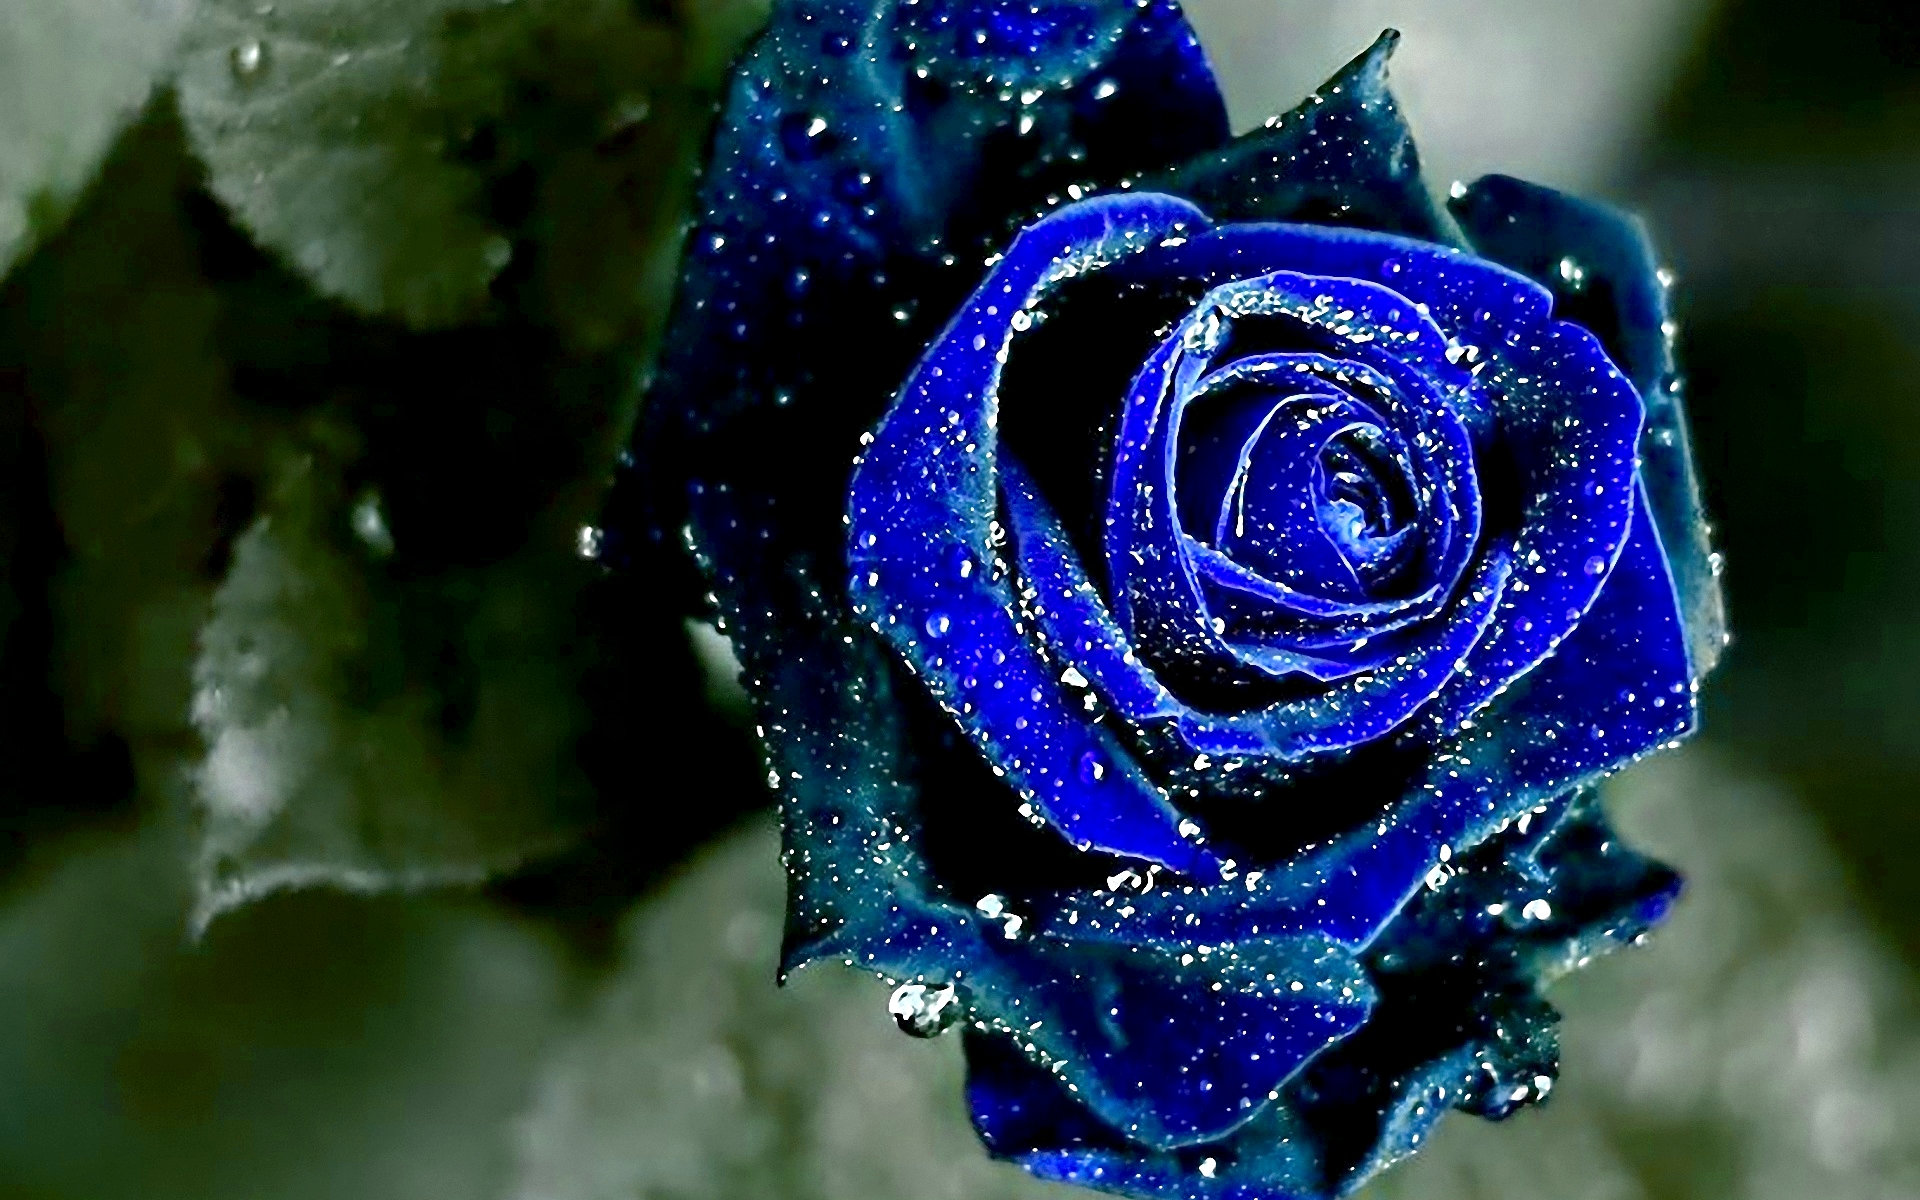 July By Stephen Ments Off On HD Wallpaper 1080p Blue Rose